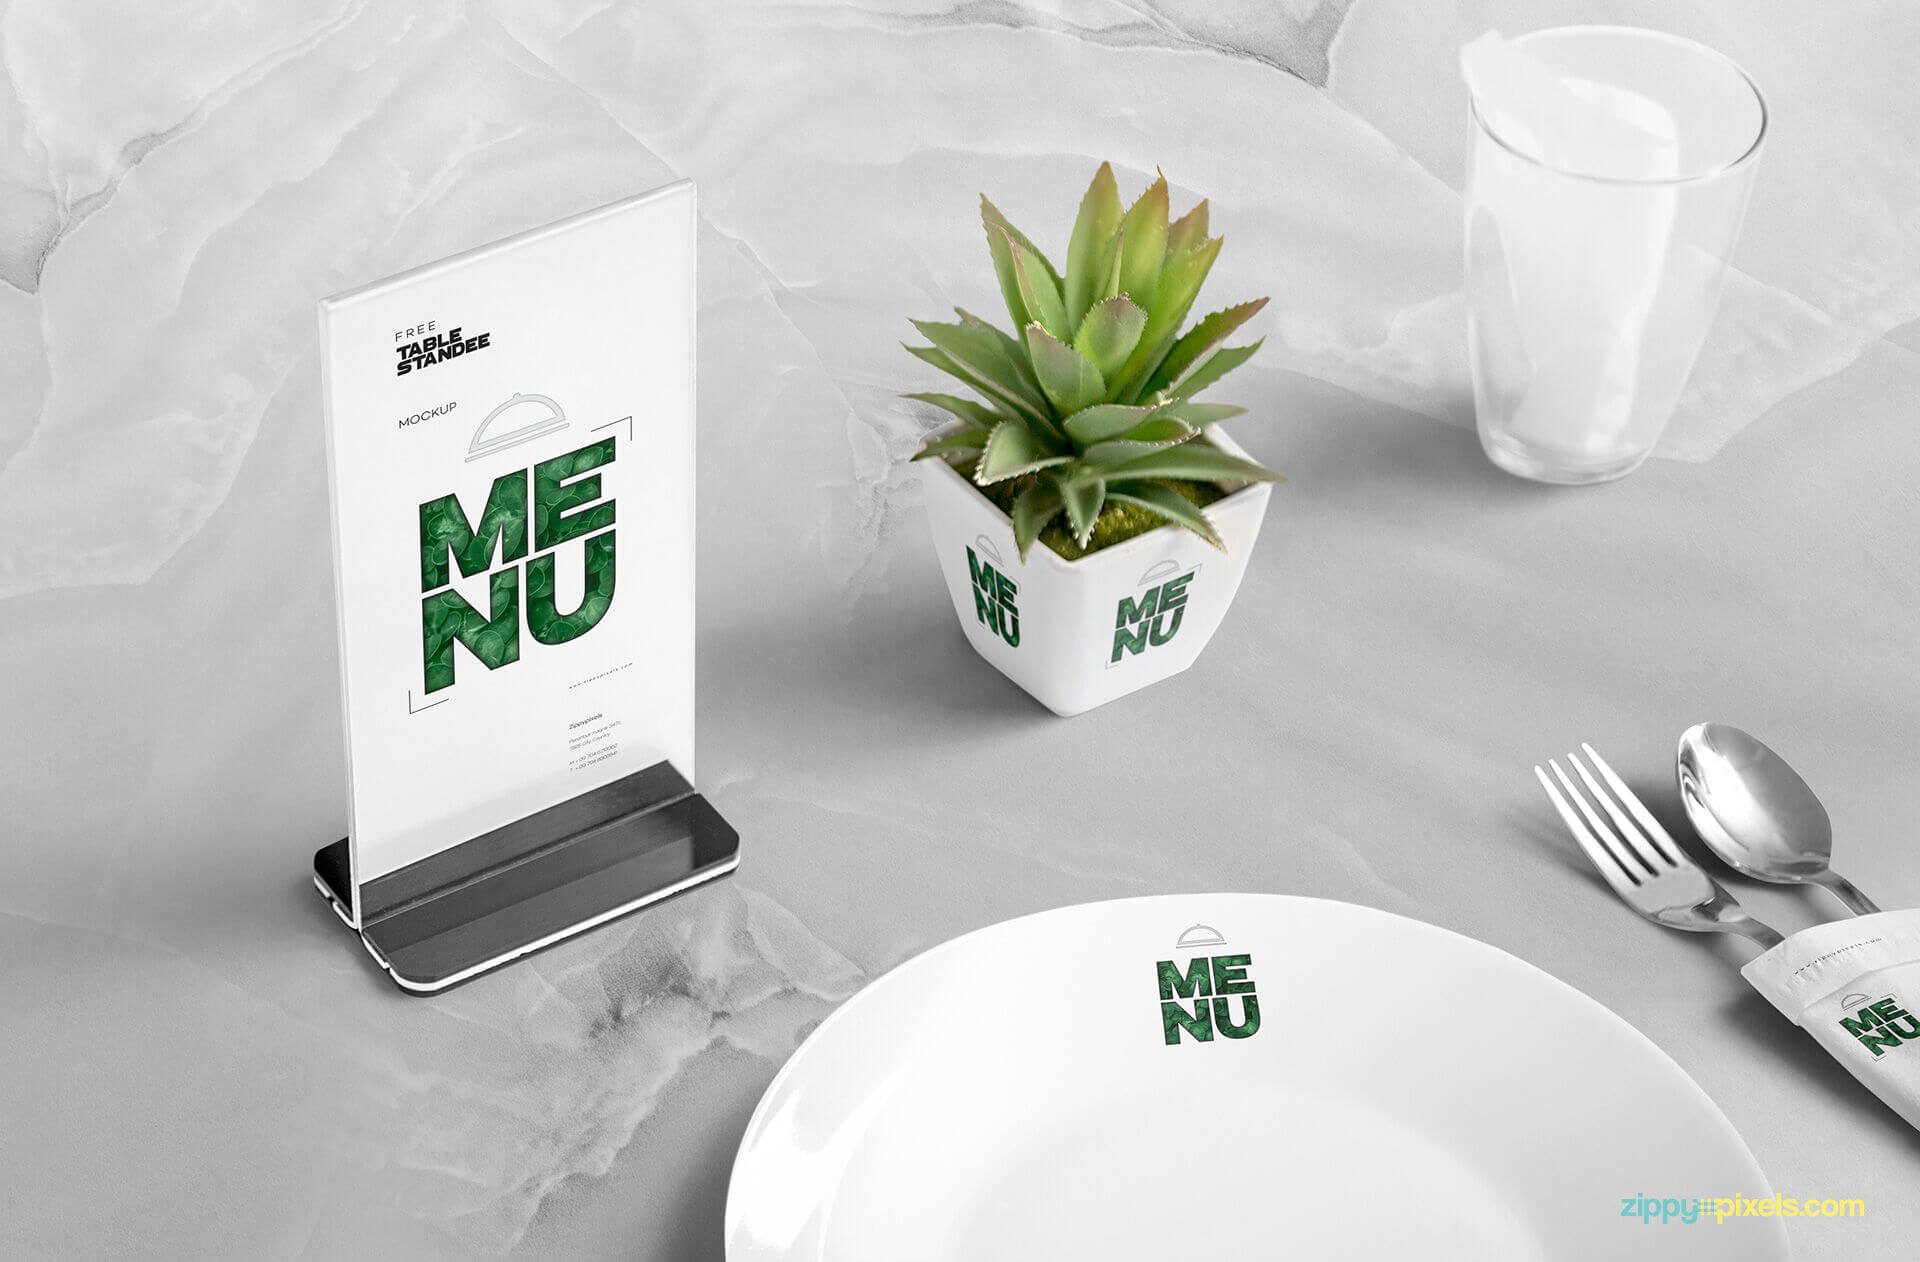 Table Menu Standee Mockup Scene with Plant, Glass, and Plate